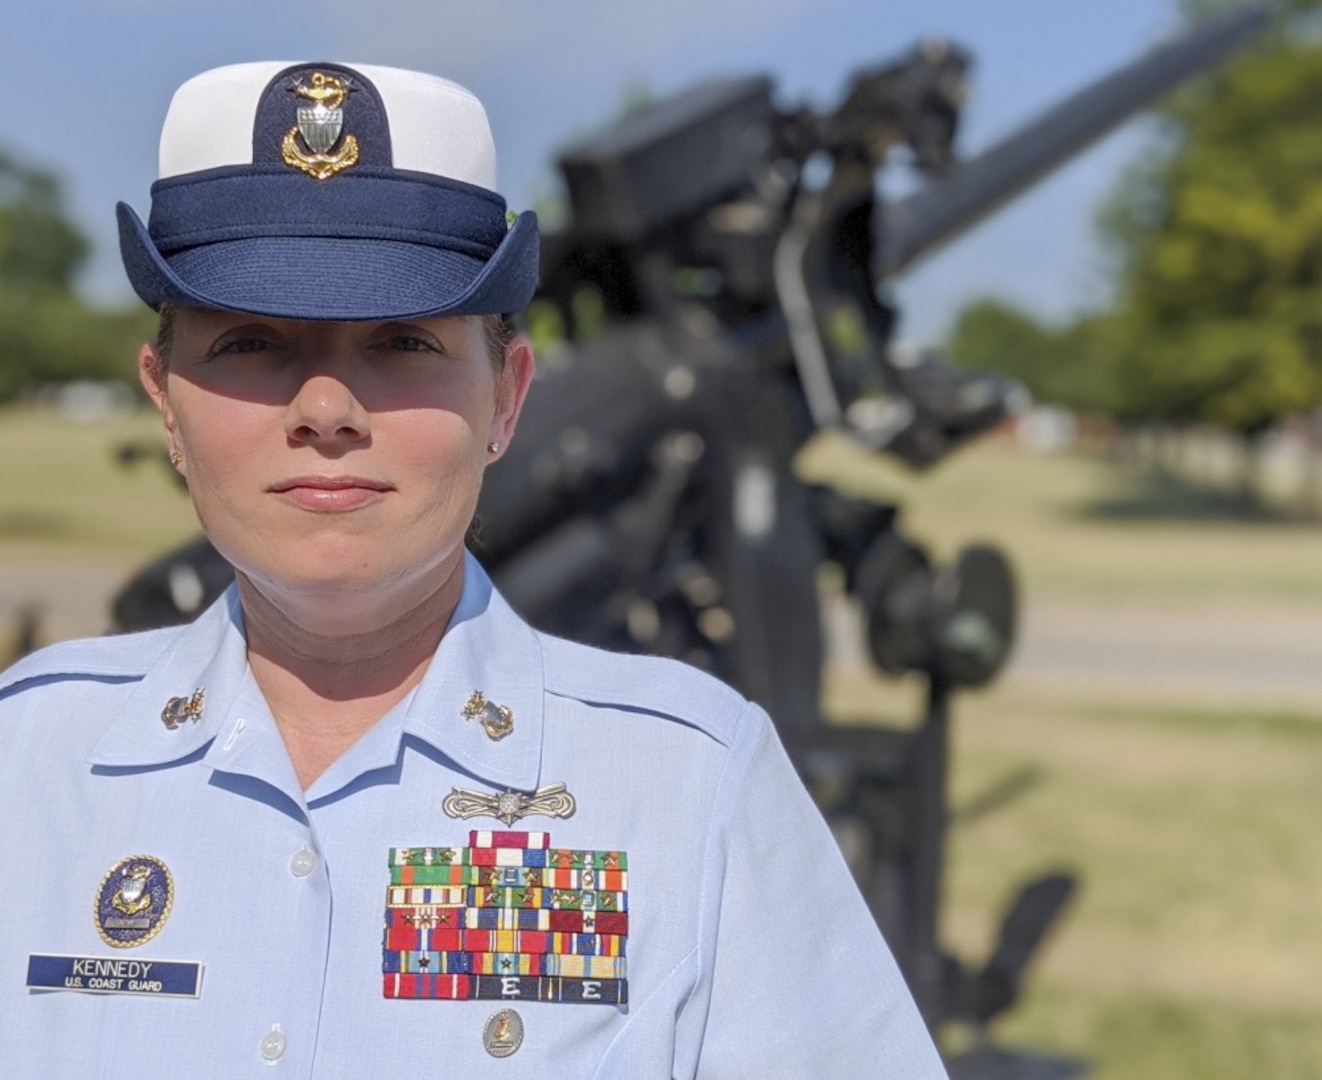 U.S. Coast Guard Master Chief Petty Officer Laurie A Kennedy, the gunner’s mate rating force master chief, stands in front of a decommissioned canon after being pinned master chief at the Coast Guard Yard in Baltimore, July 21, 2020. Kennedy was the first female gunner’s mate to be pinned master chief in Coast Guard history.
(U.S. Coast Guard photo by Petty Officer 3rd Class Ronald Hodges)